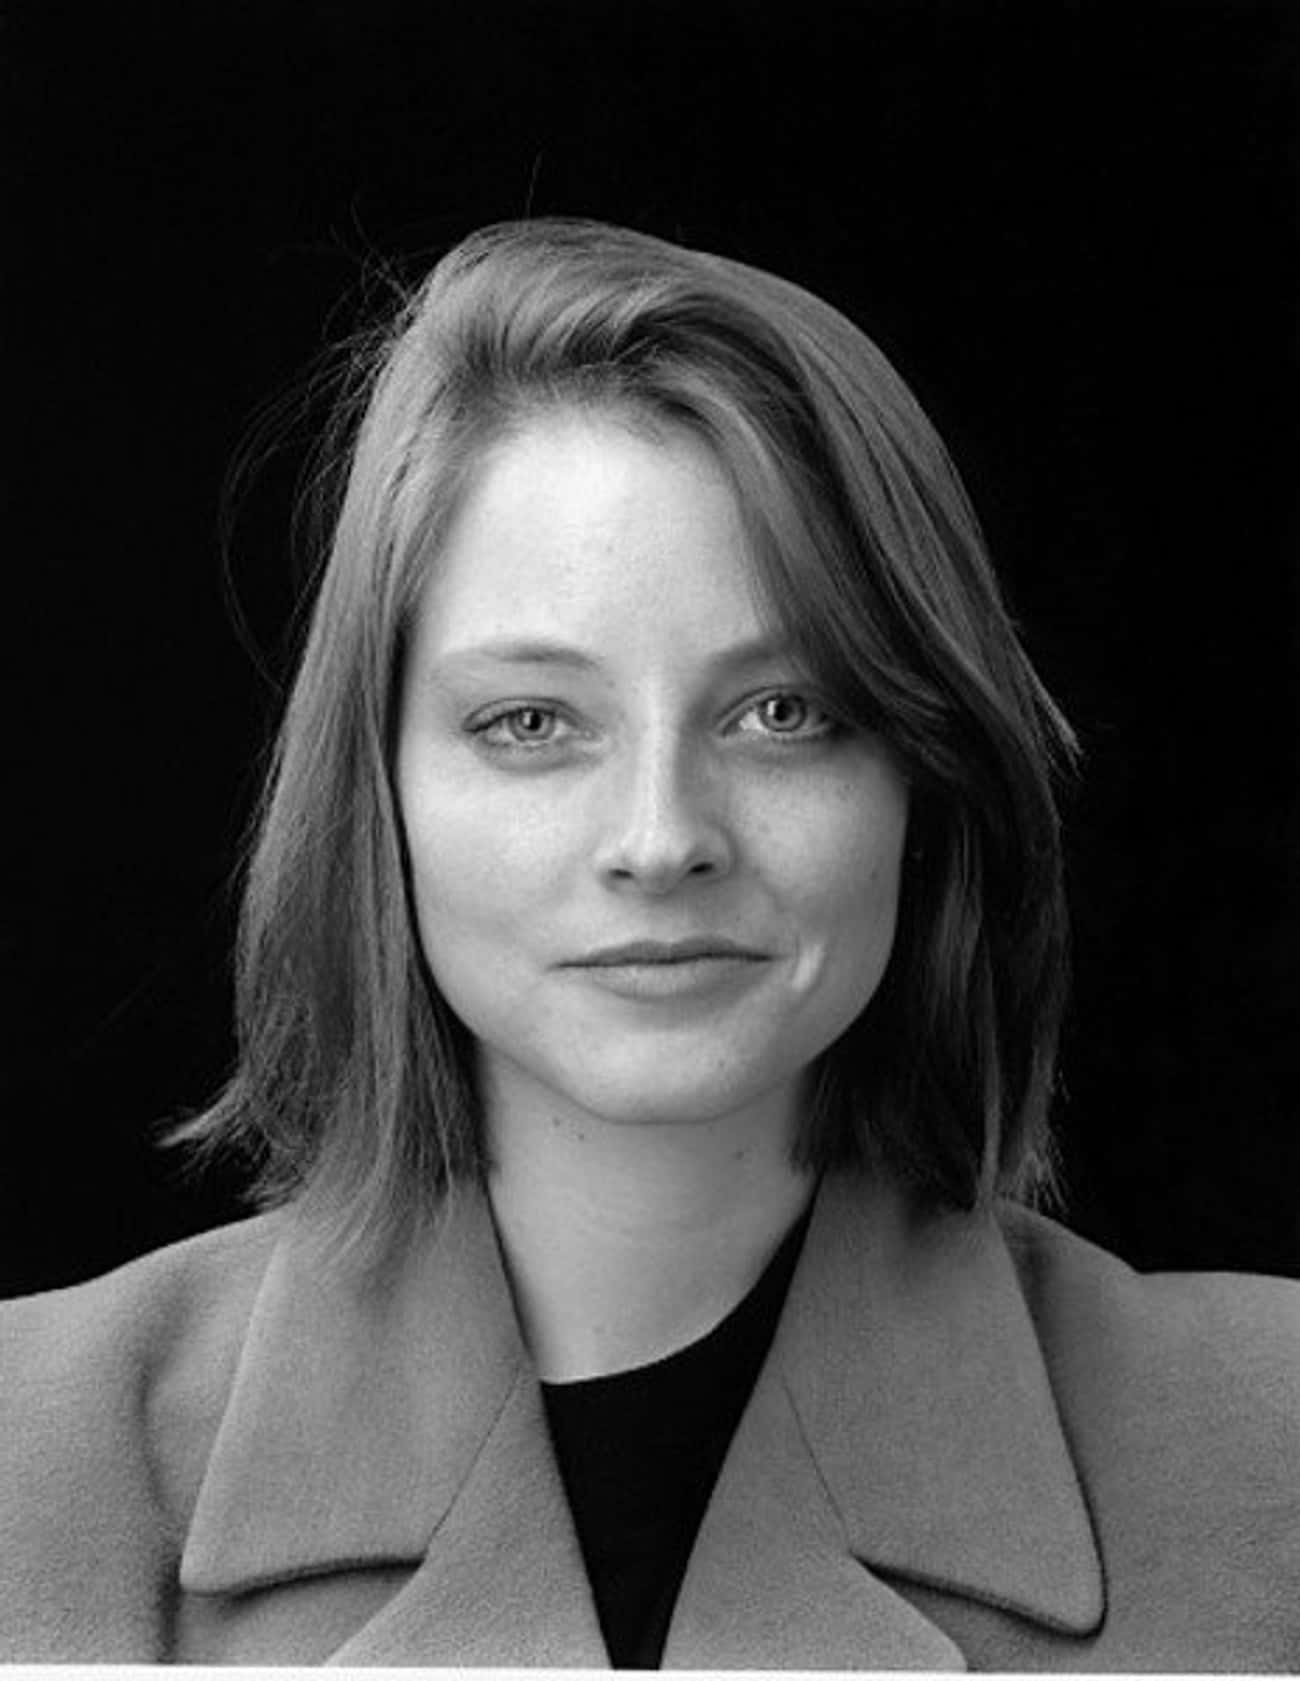 Young Jodie Foster in Gray Coat and Black T-Shirt